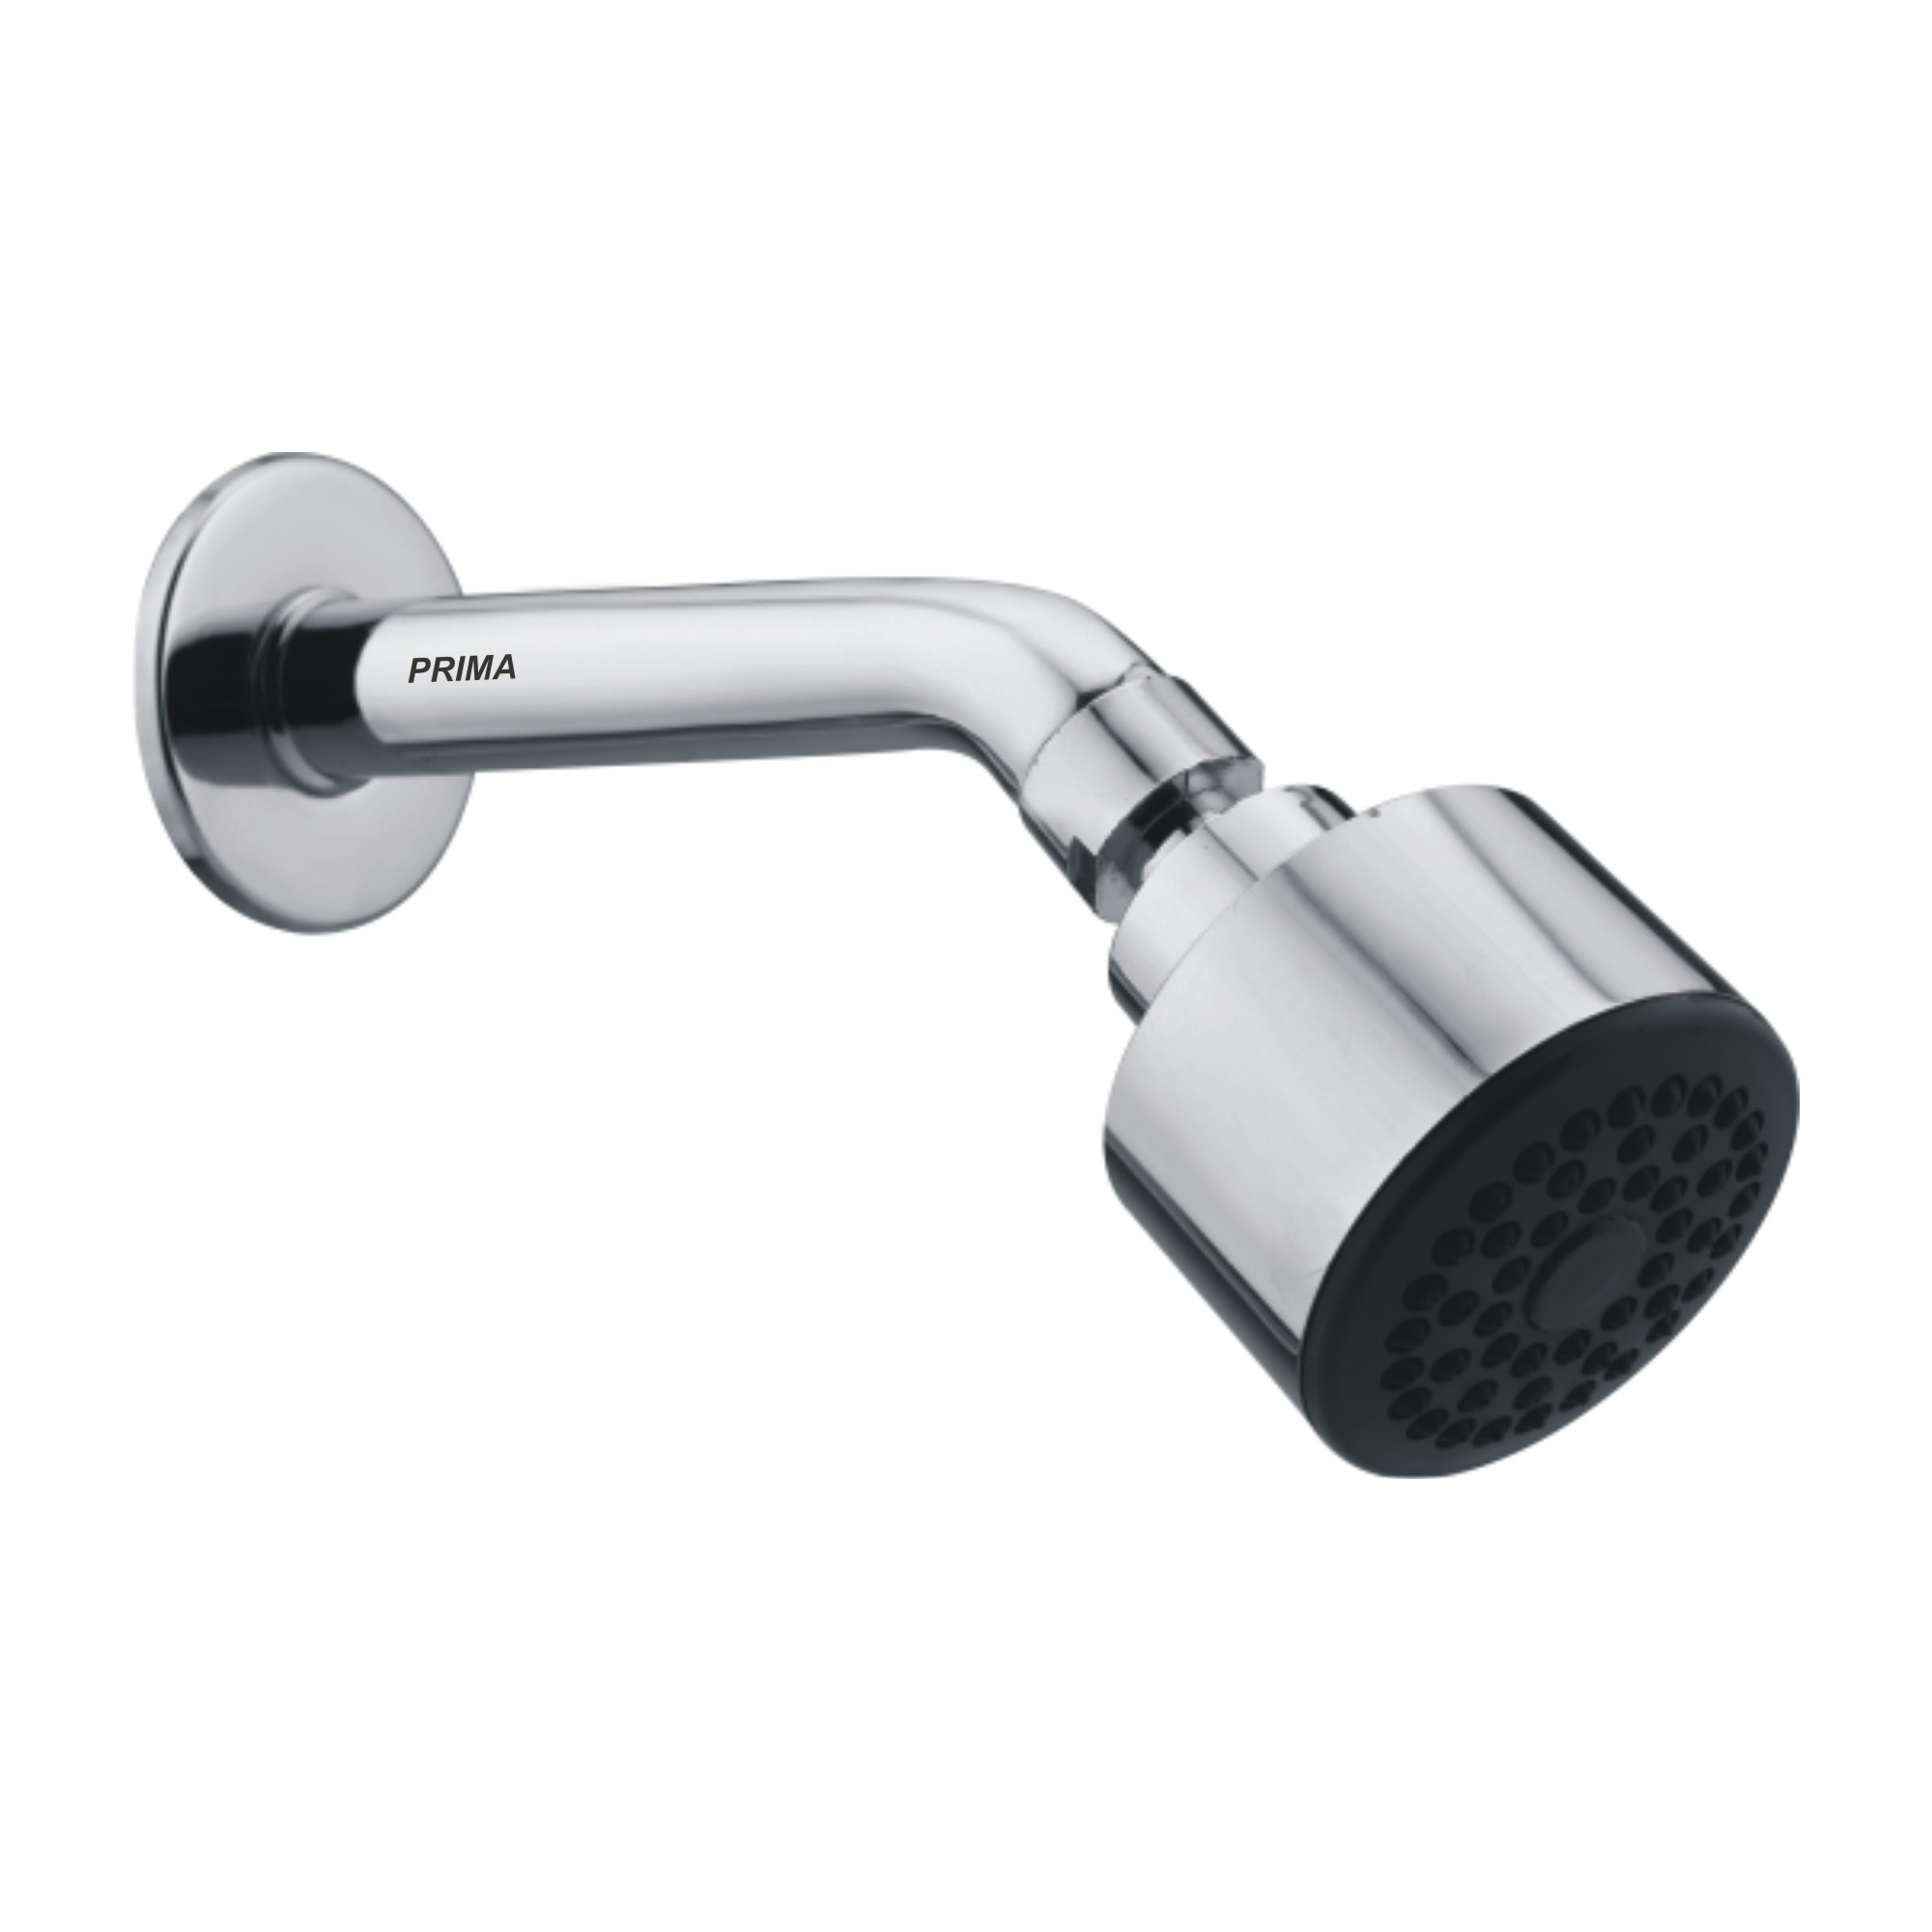 C.P OVERHEAD SHOWER WITH ARM - GROHE 